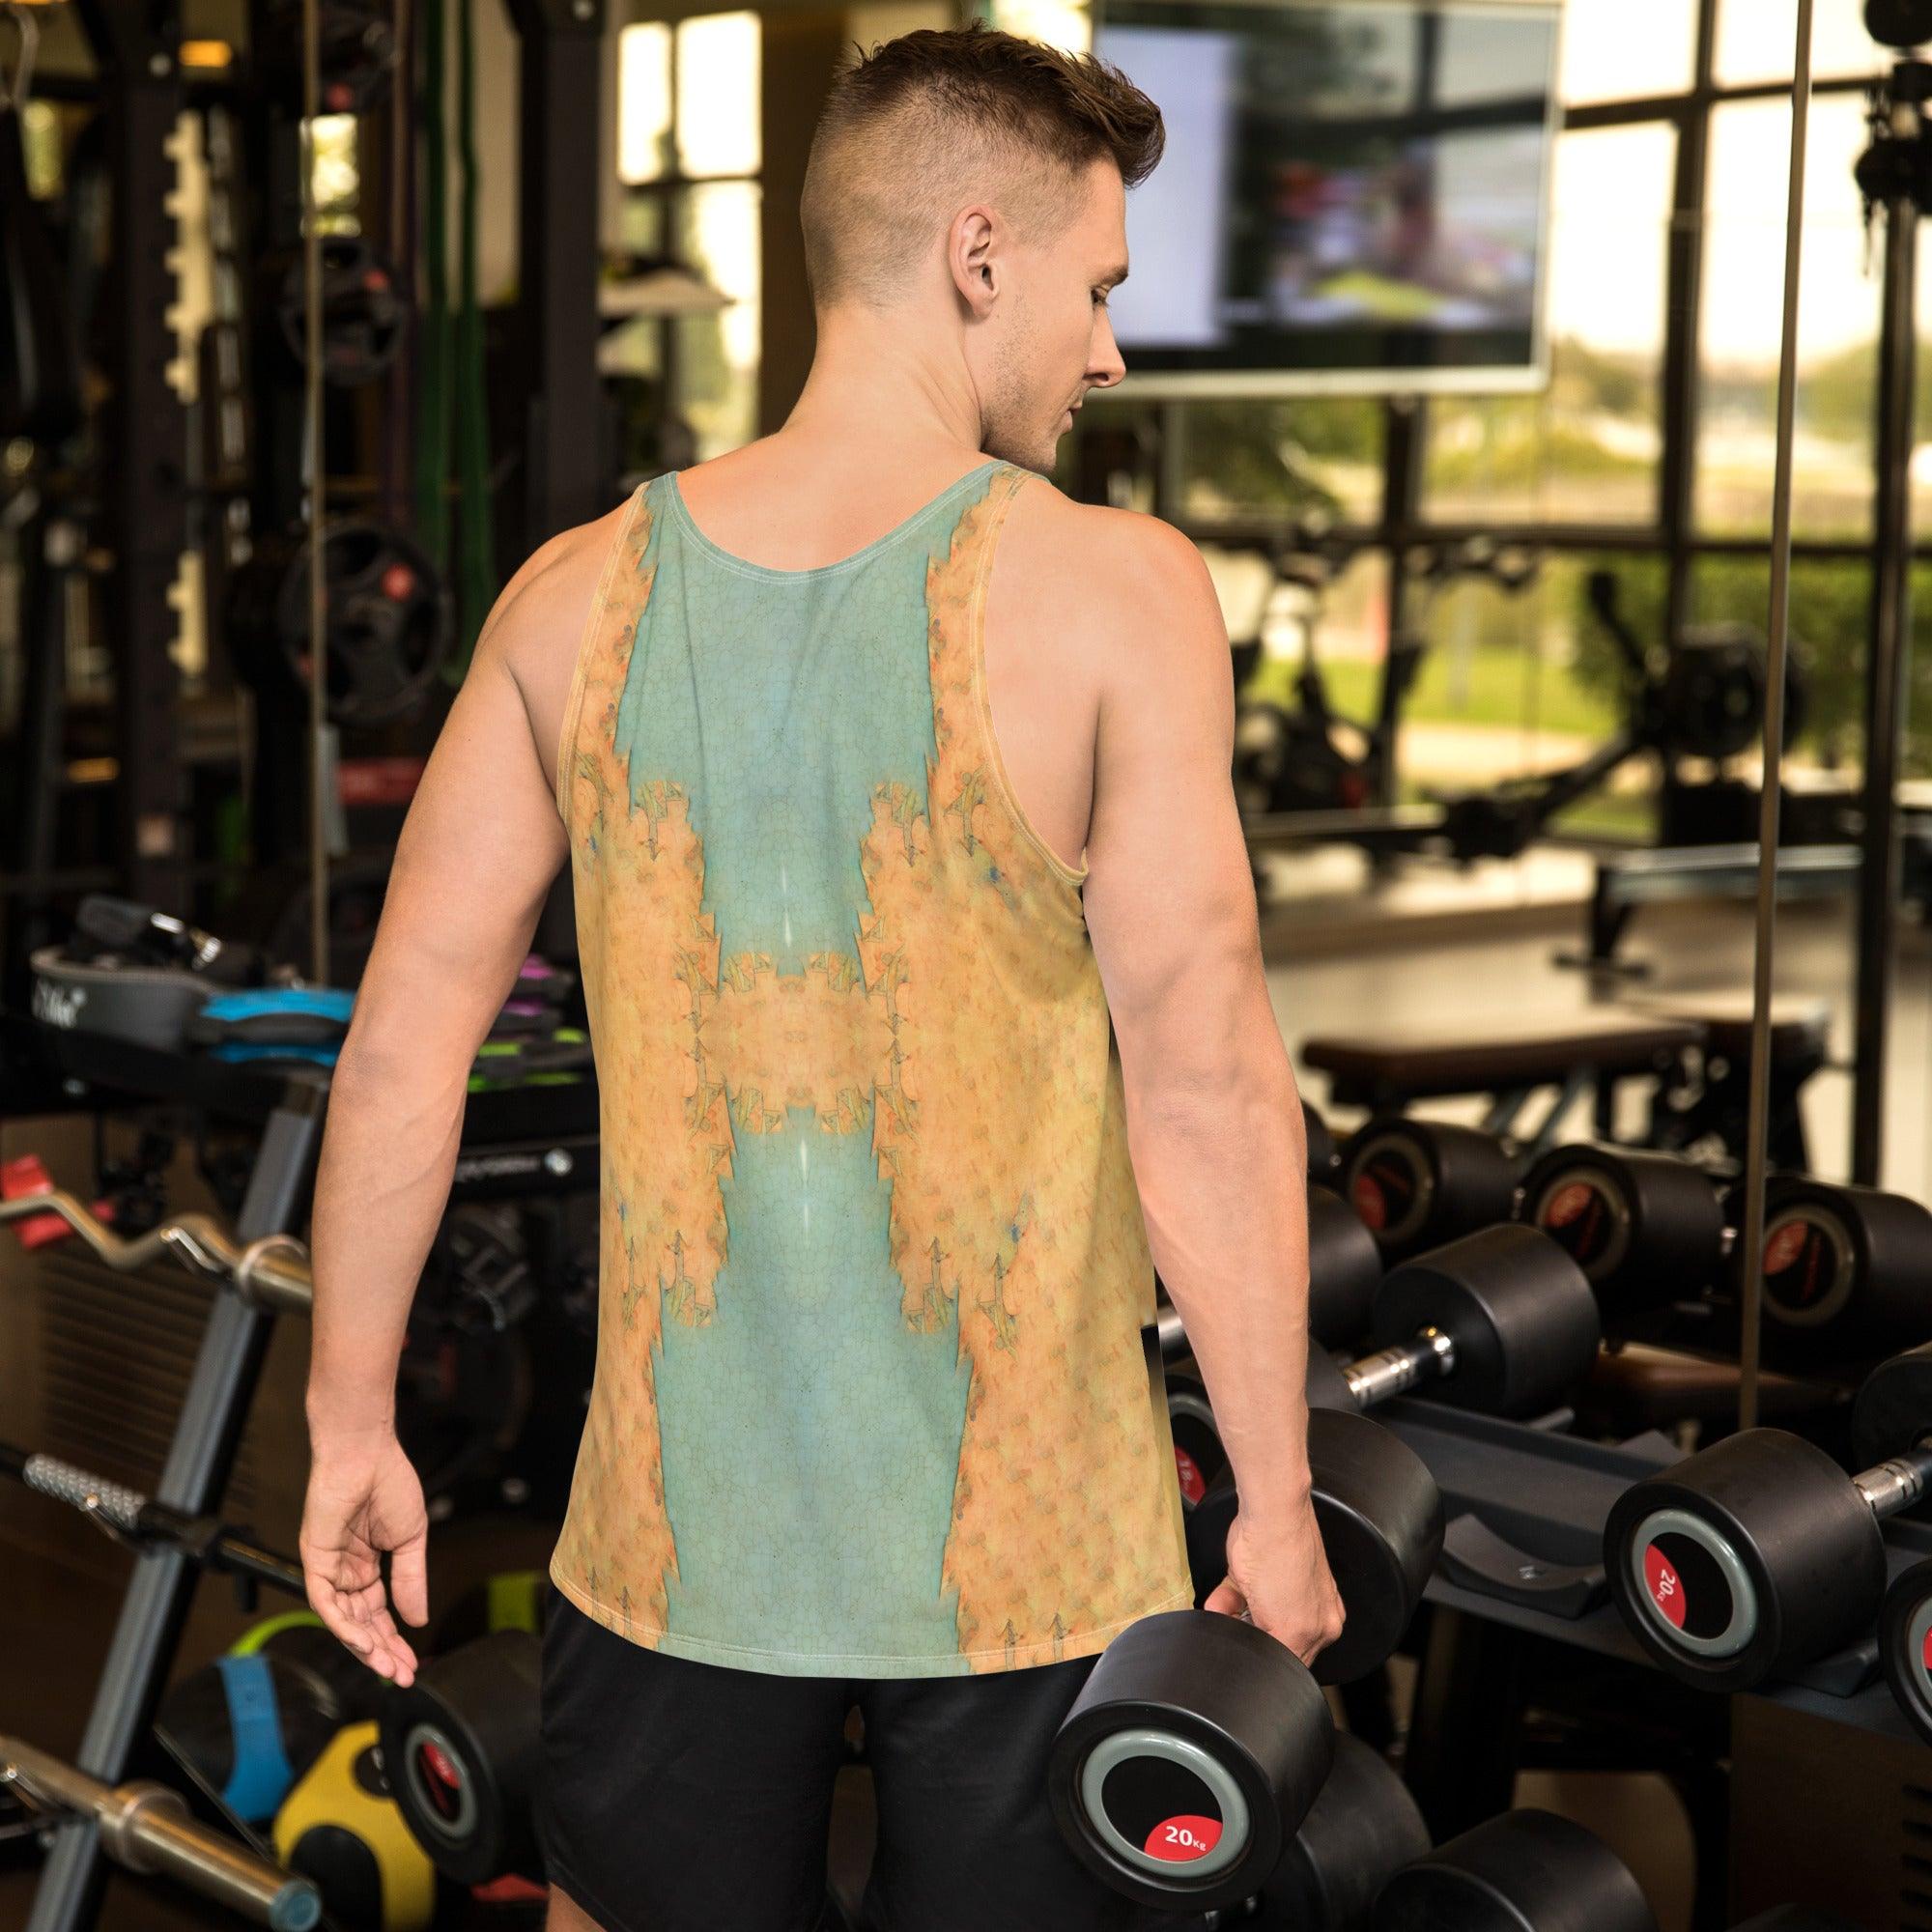 NS 826 Men's Tank Top in gym setting.